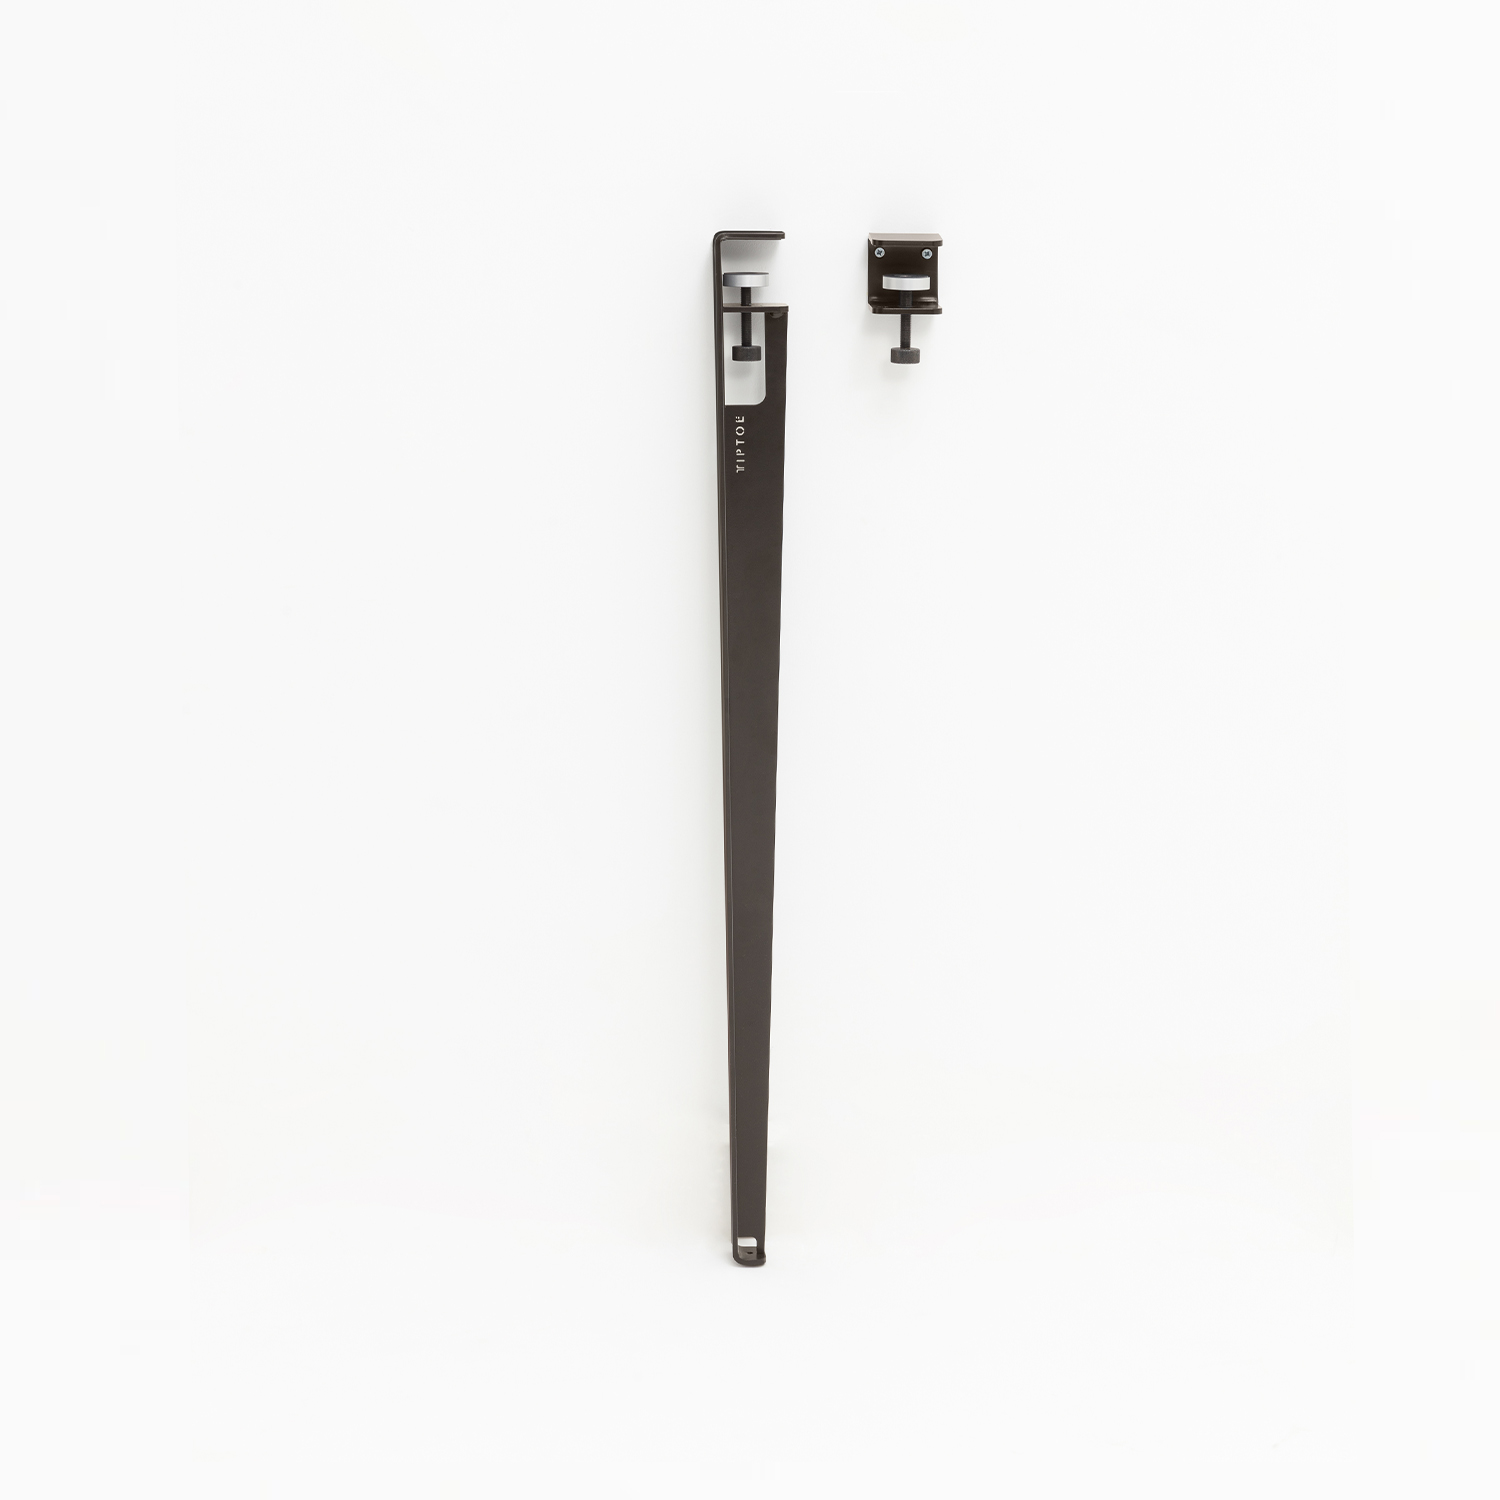 Counter table leg 90cm and wall BRACKET